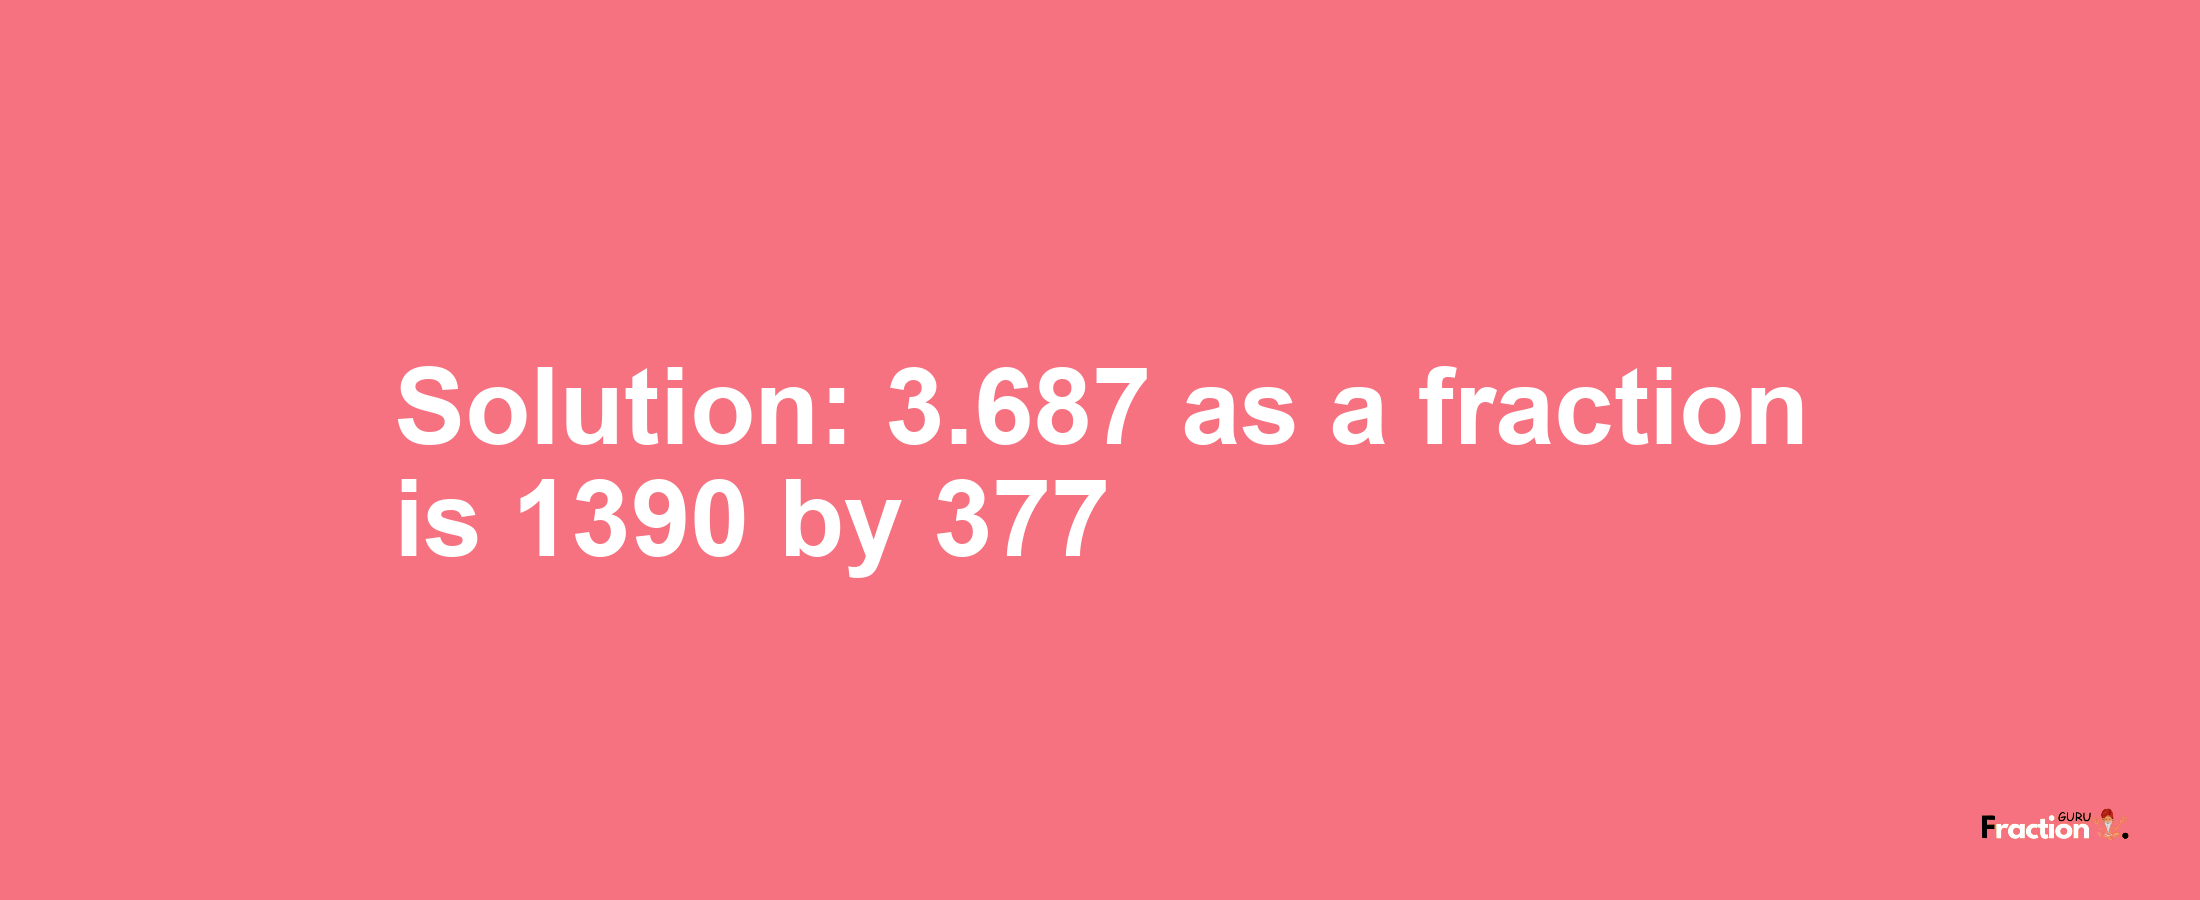 Solution:3.687 as a fraction is 1390/377